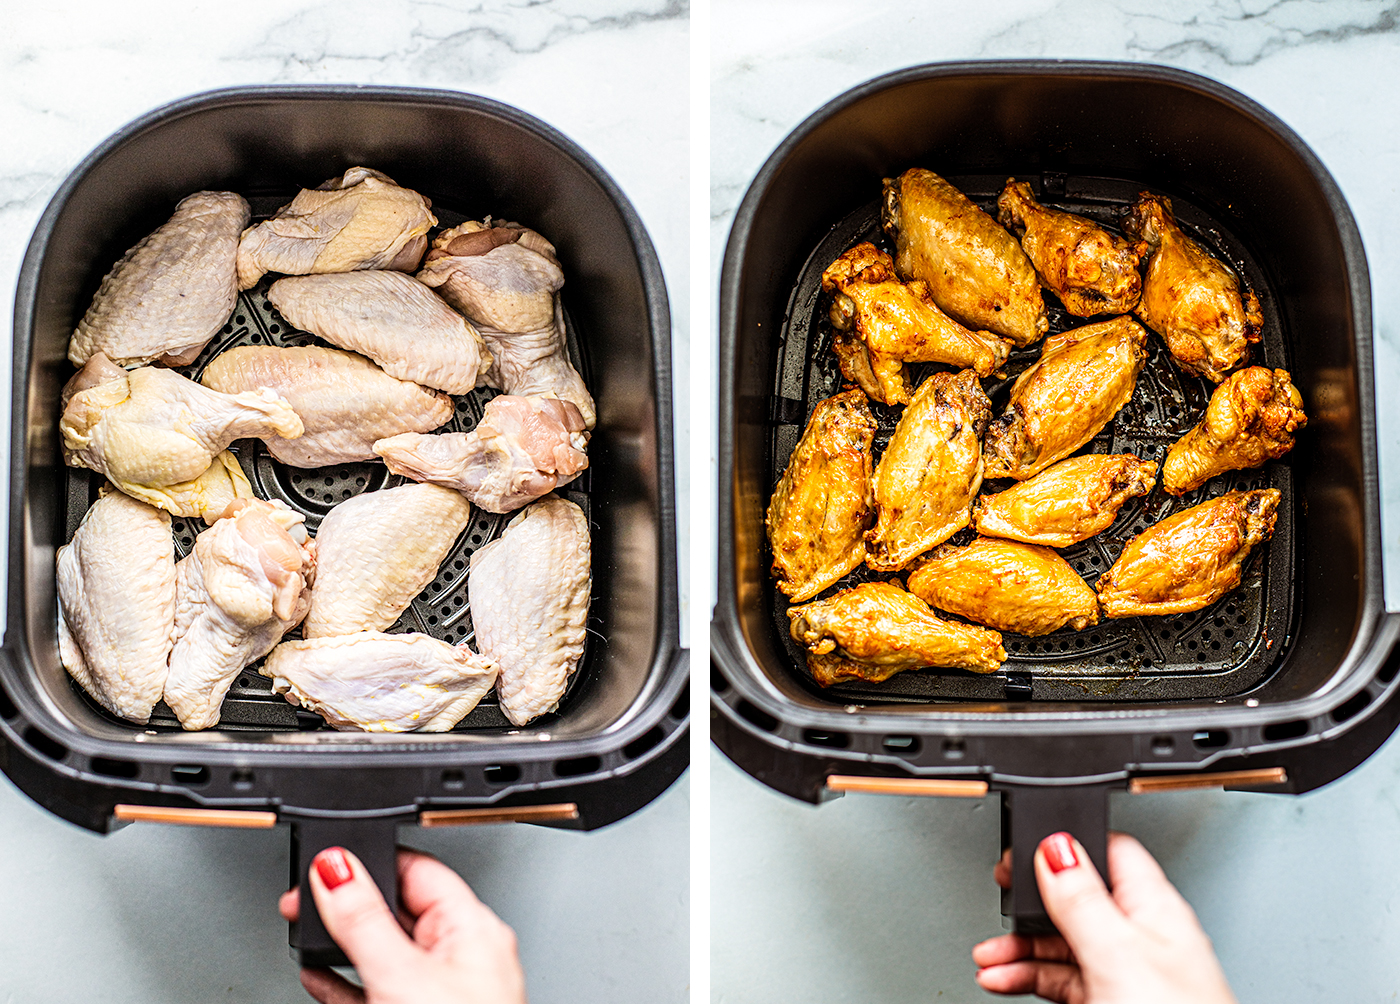 Side by side shots of uncooked wings in air fryer basket, and cooked wings in basket.